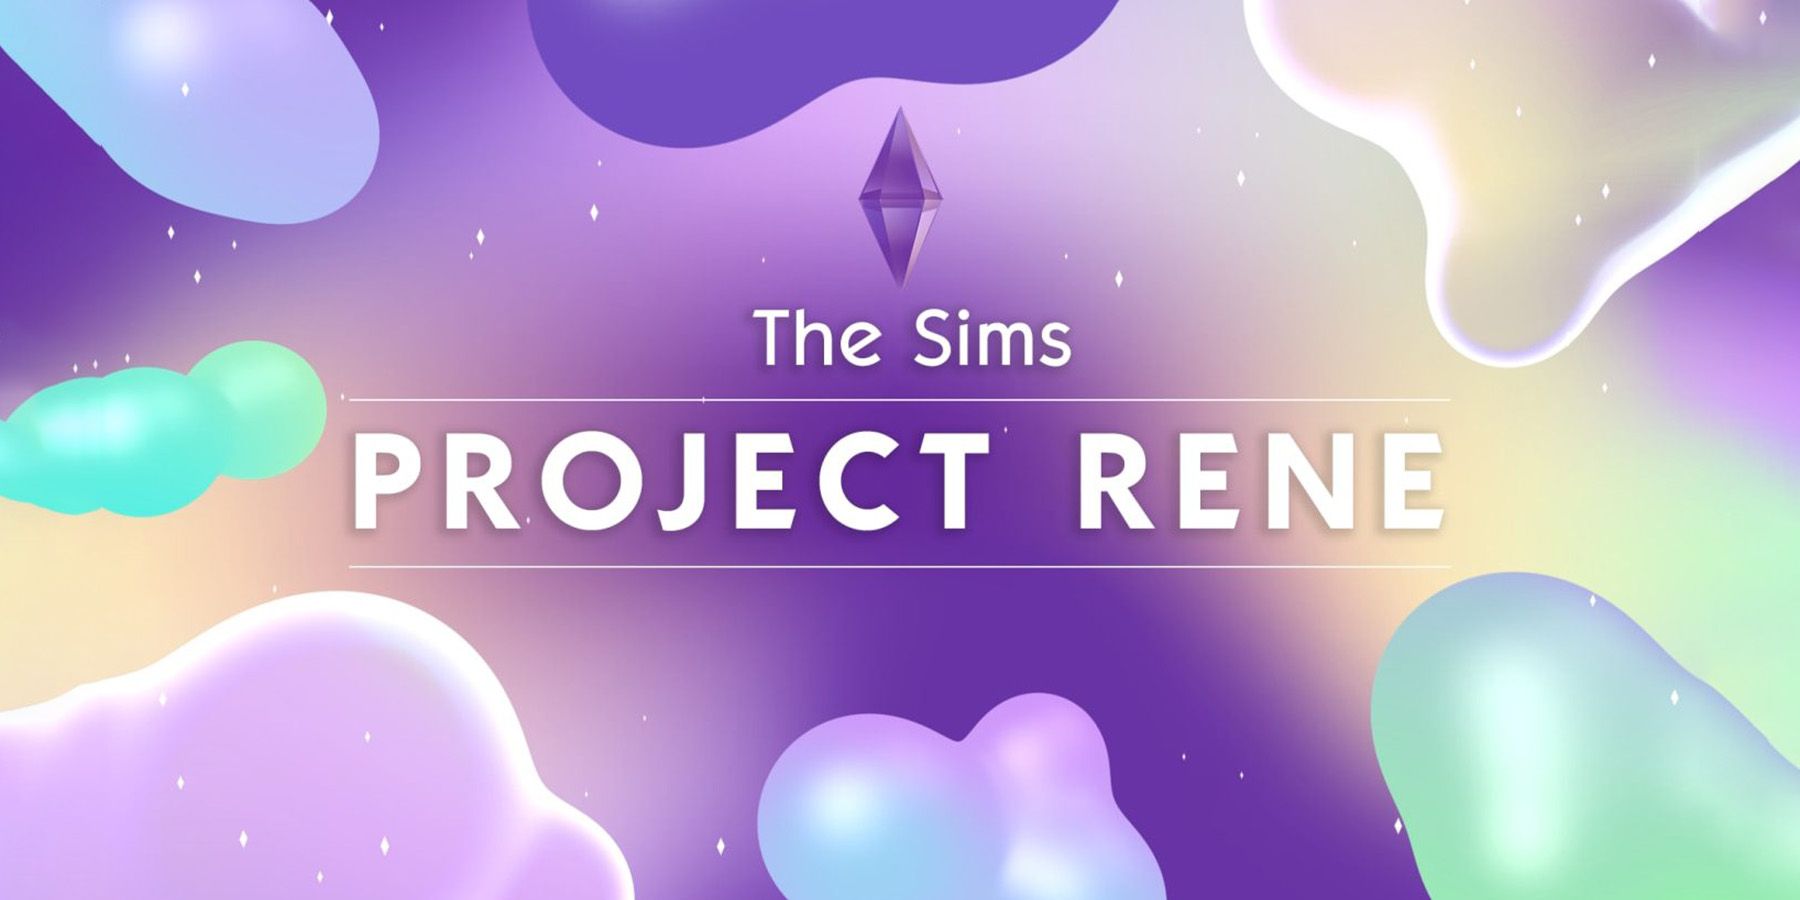 The Sims 5 Project Rene tentative official logo 2022 2x1 crop upscaled